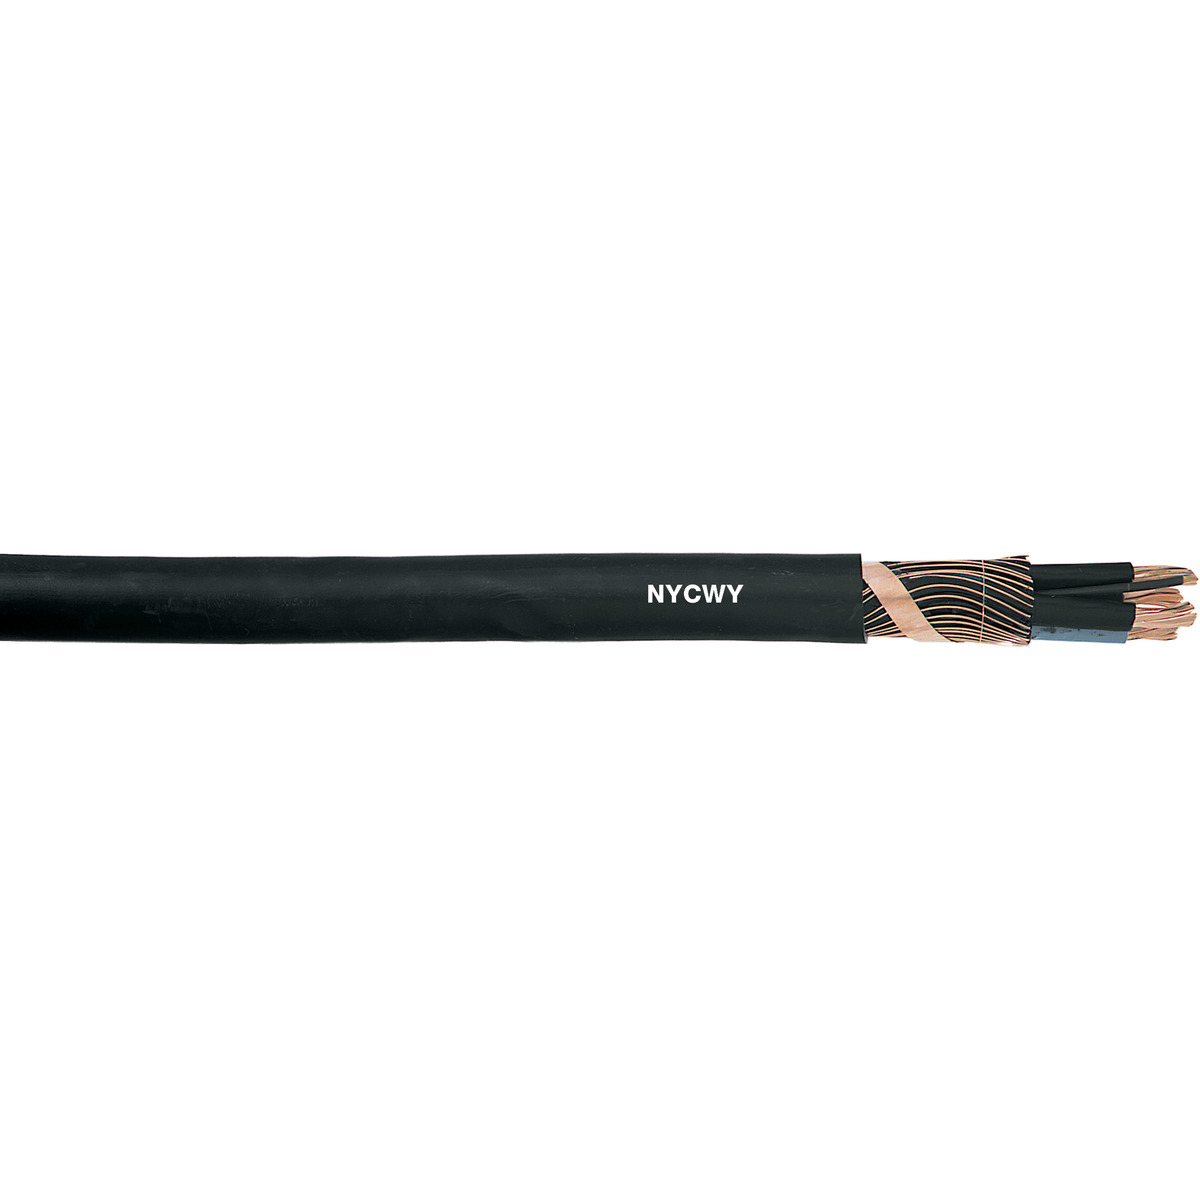 NYCWY power cable